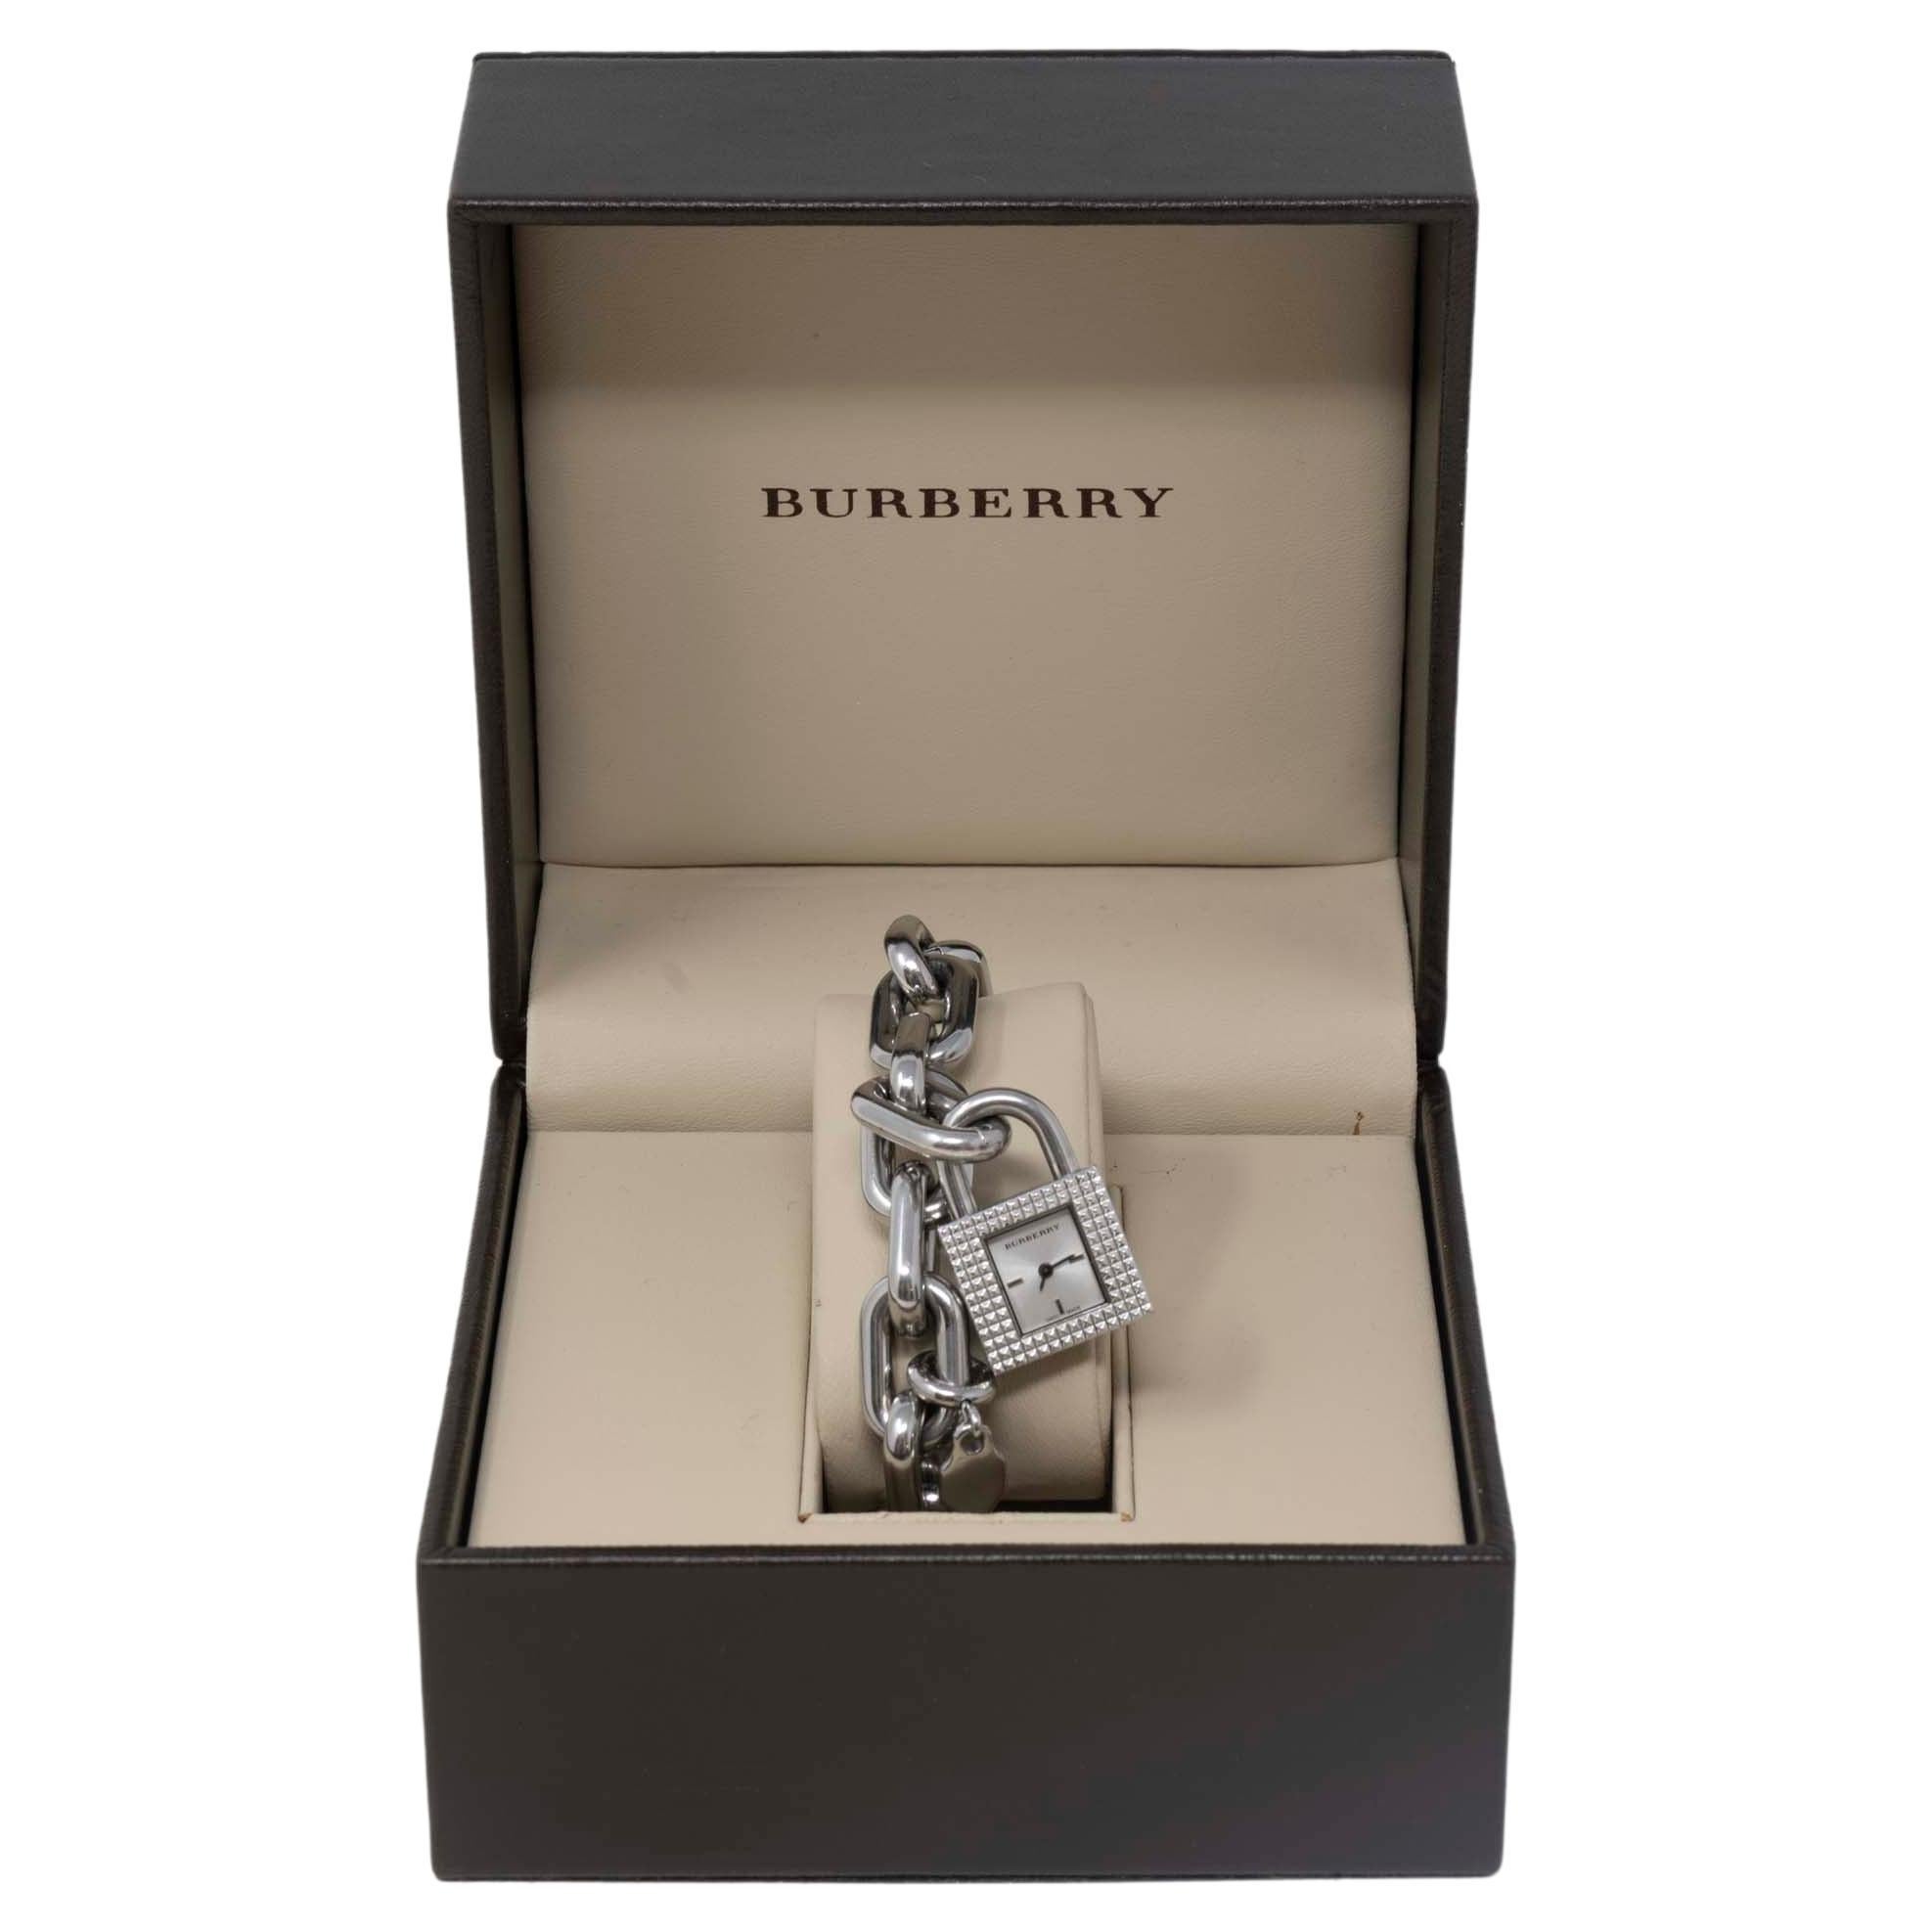 Used Burberry Watch - 28 For Sale on 1stDibs